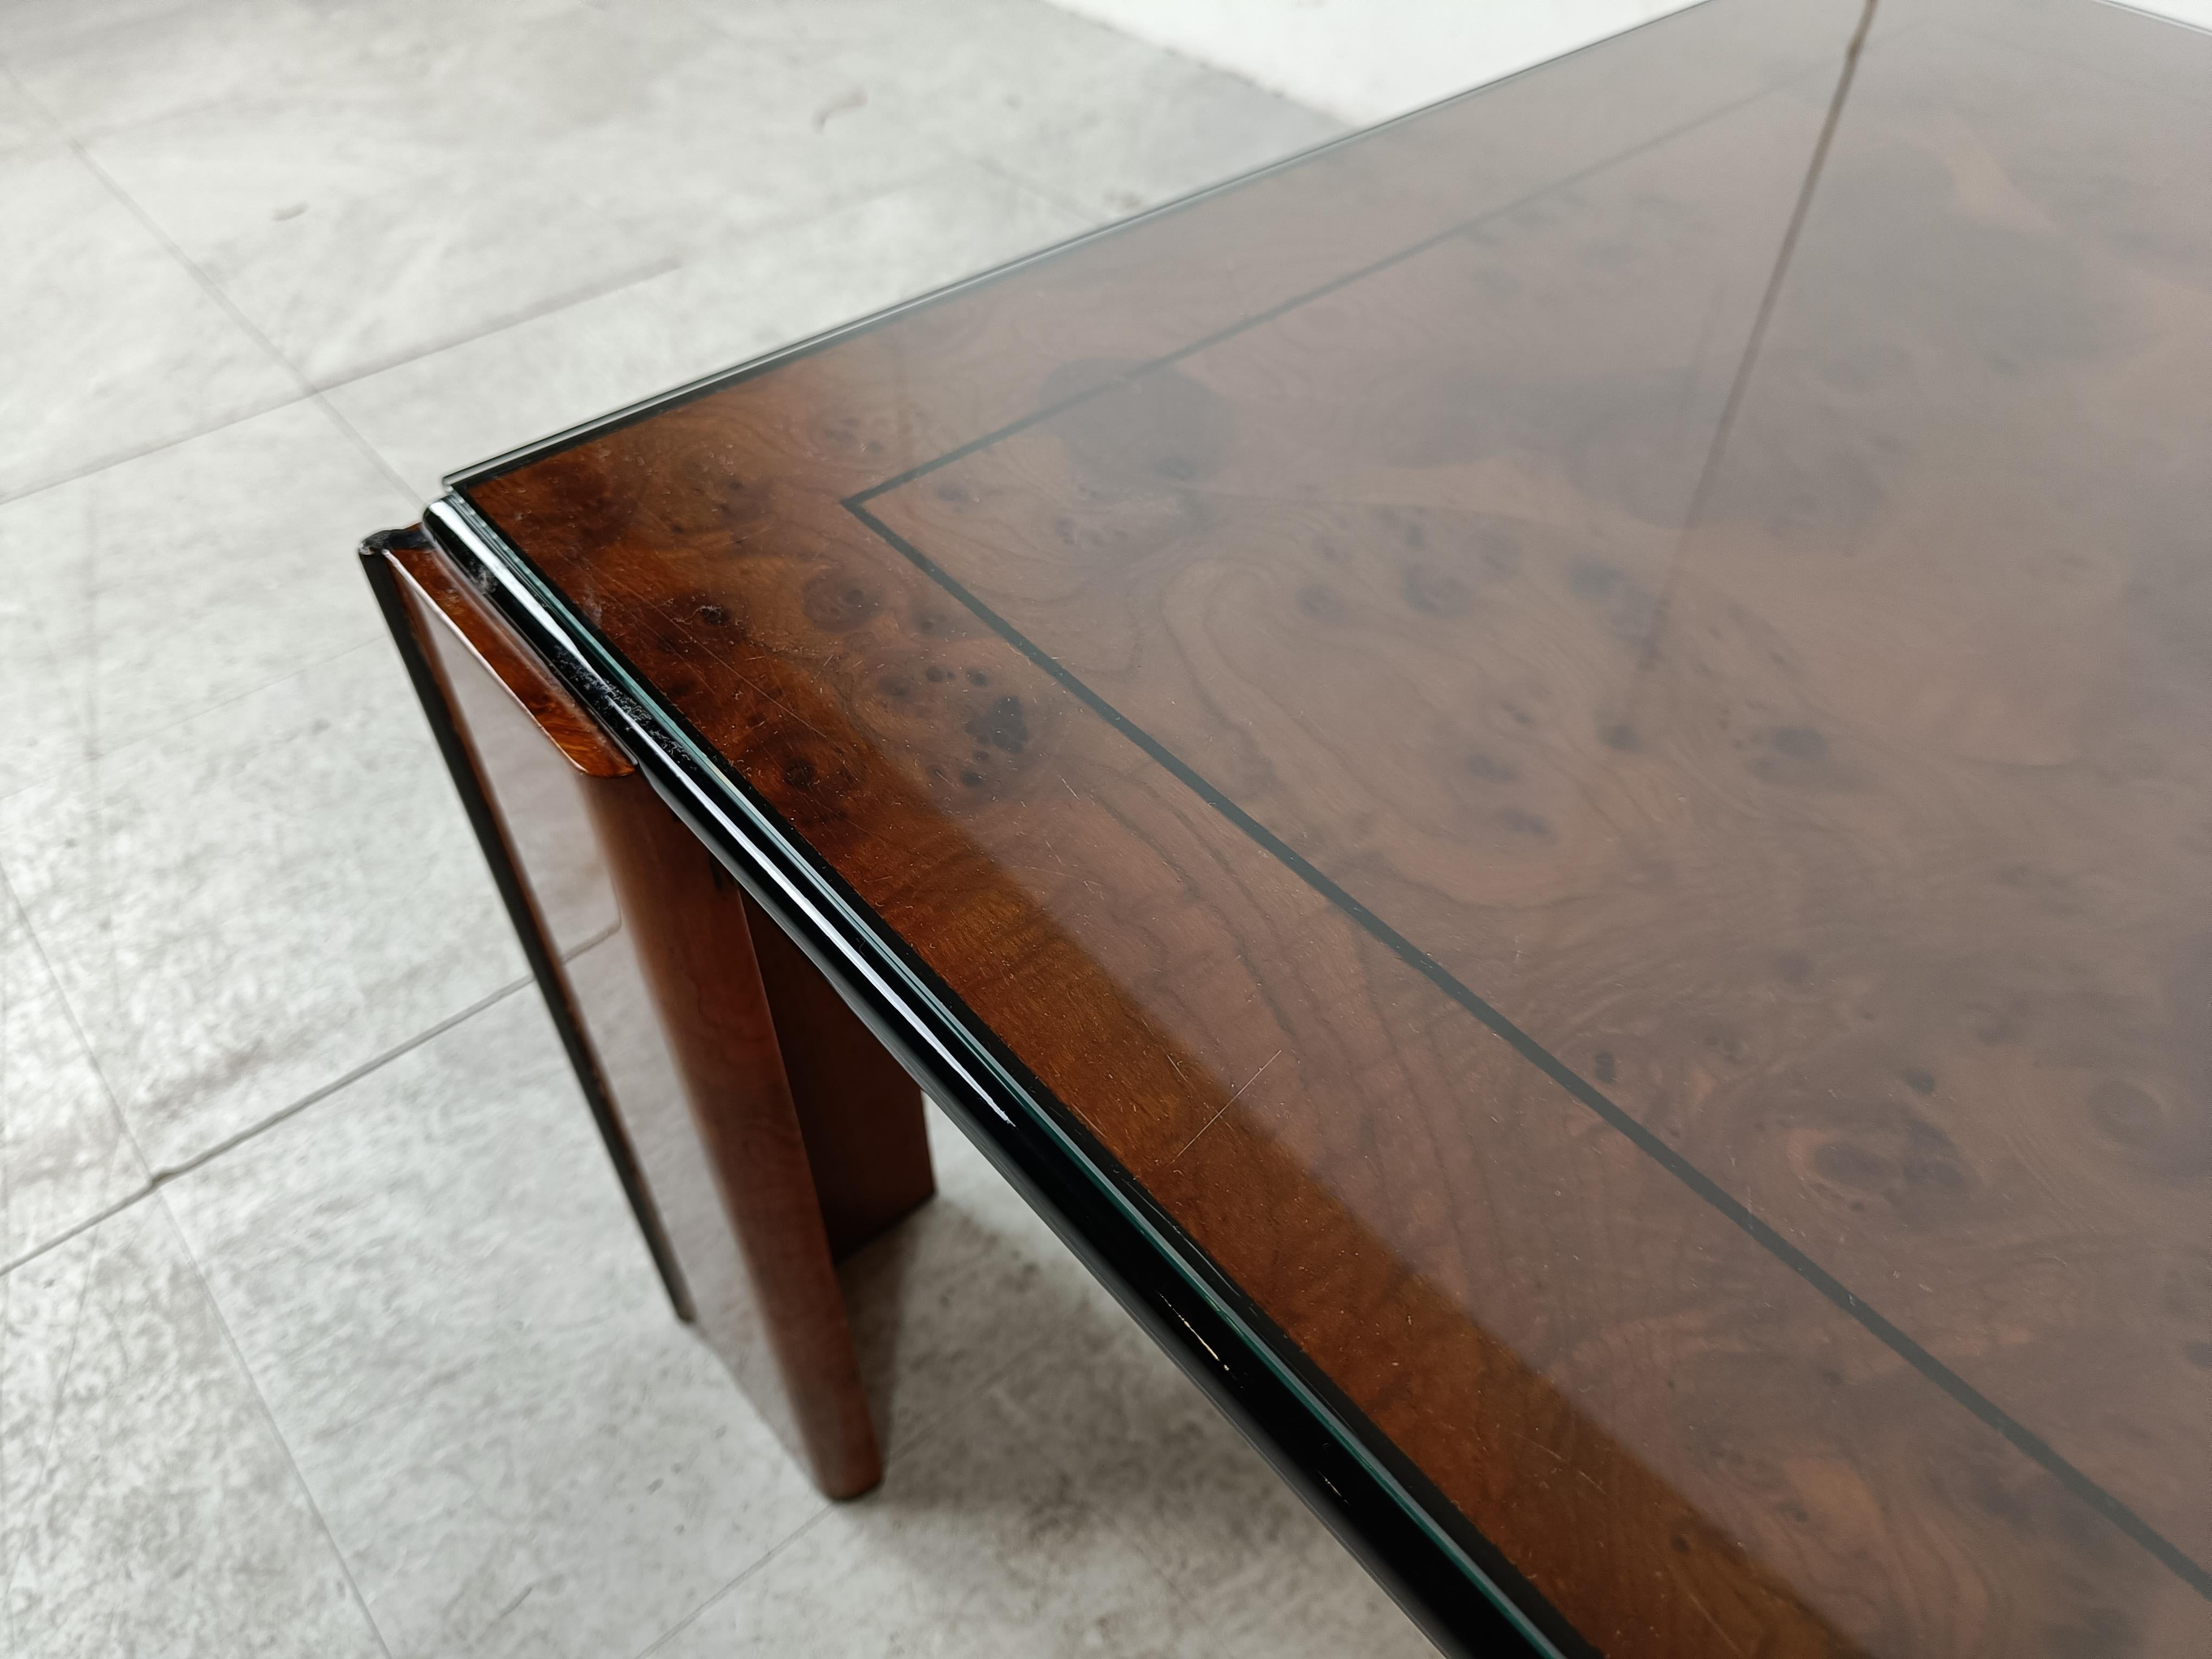 Luxurious looking coffee table with a black lacquered wooden and burl wood frame and top.

Good looking high quality coffee table from the seventies glam period.

1970s - France

Good condition, with normal age related